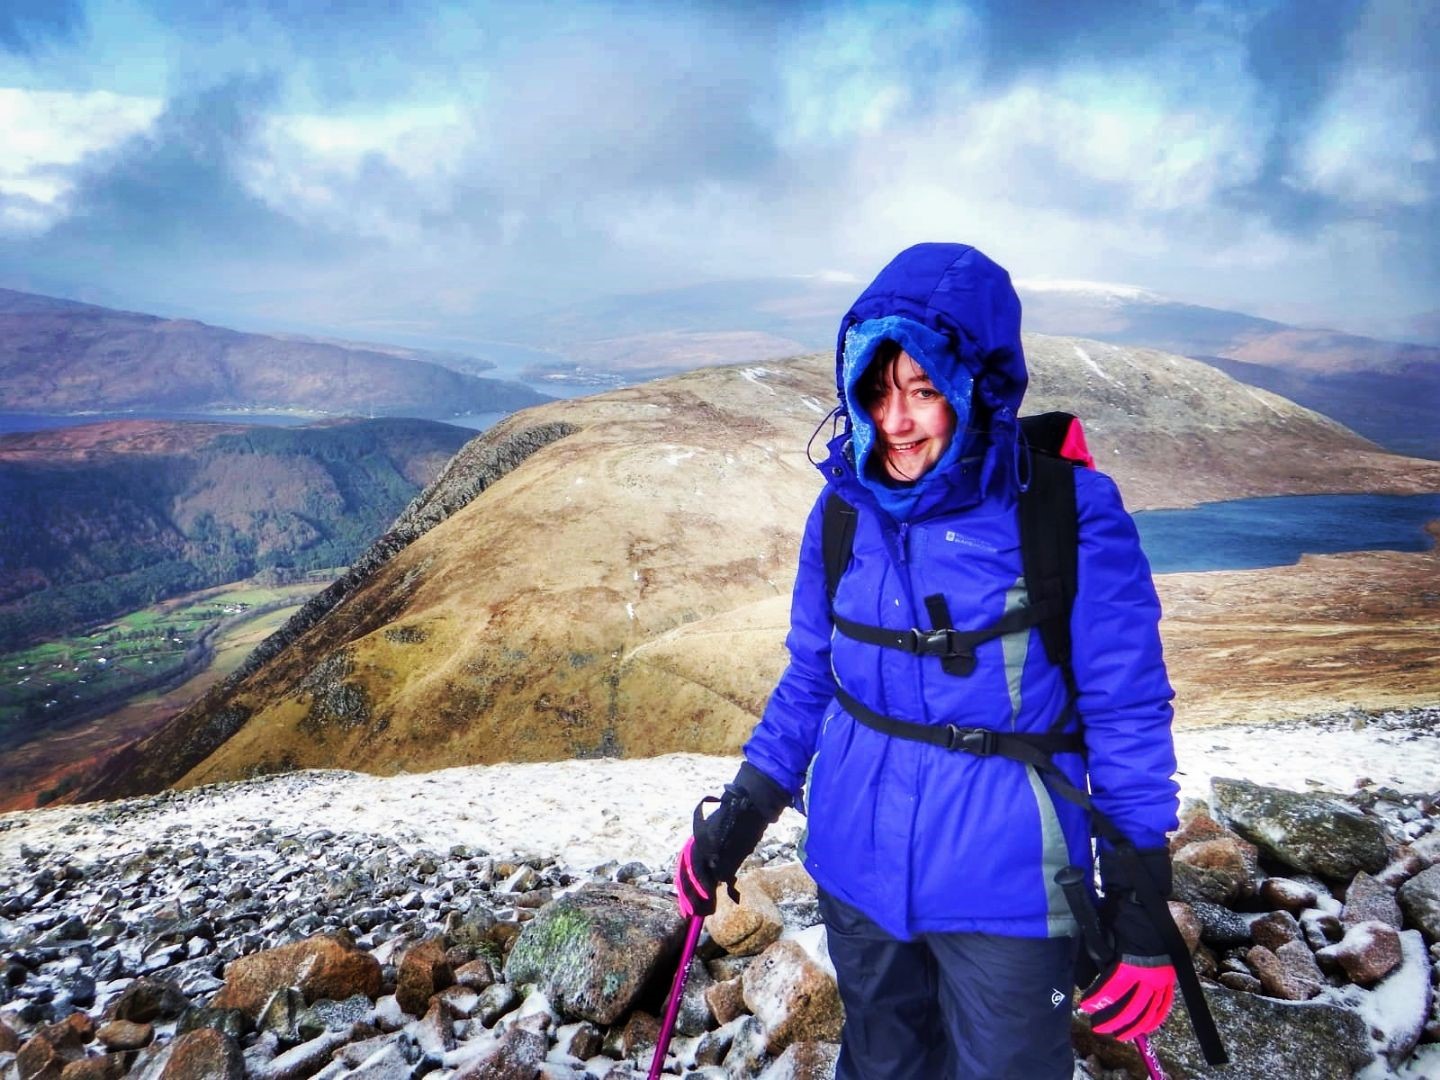 32-year-old Ashleigh McBlain from Stevenson pledged to climb Ben Nevis in aid of the Rangers Charity Foundation.